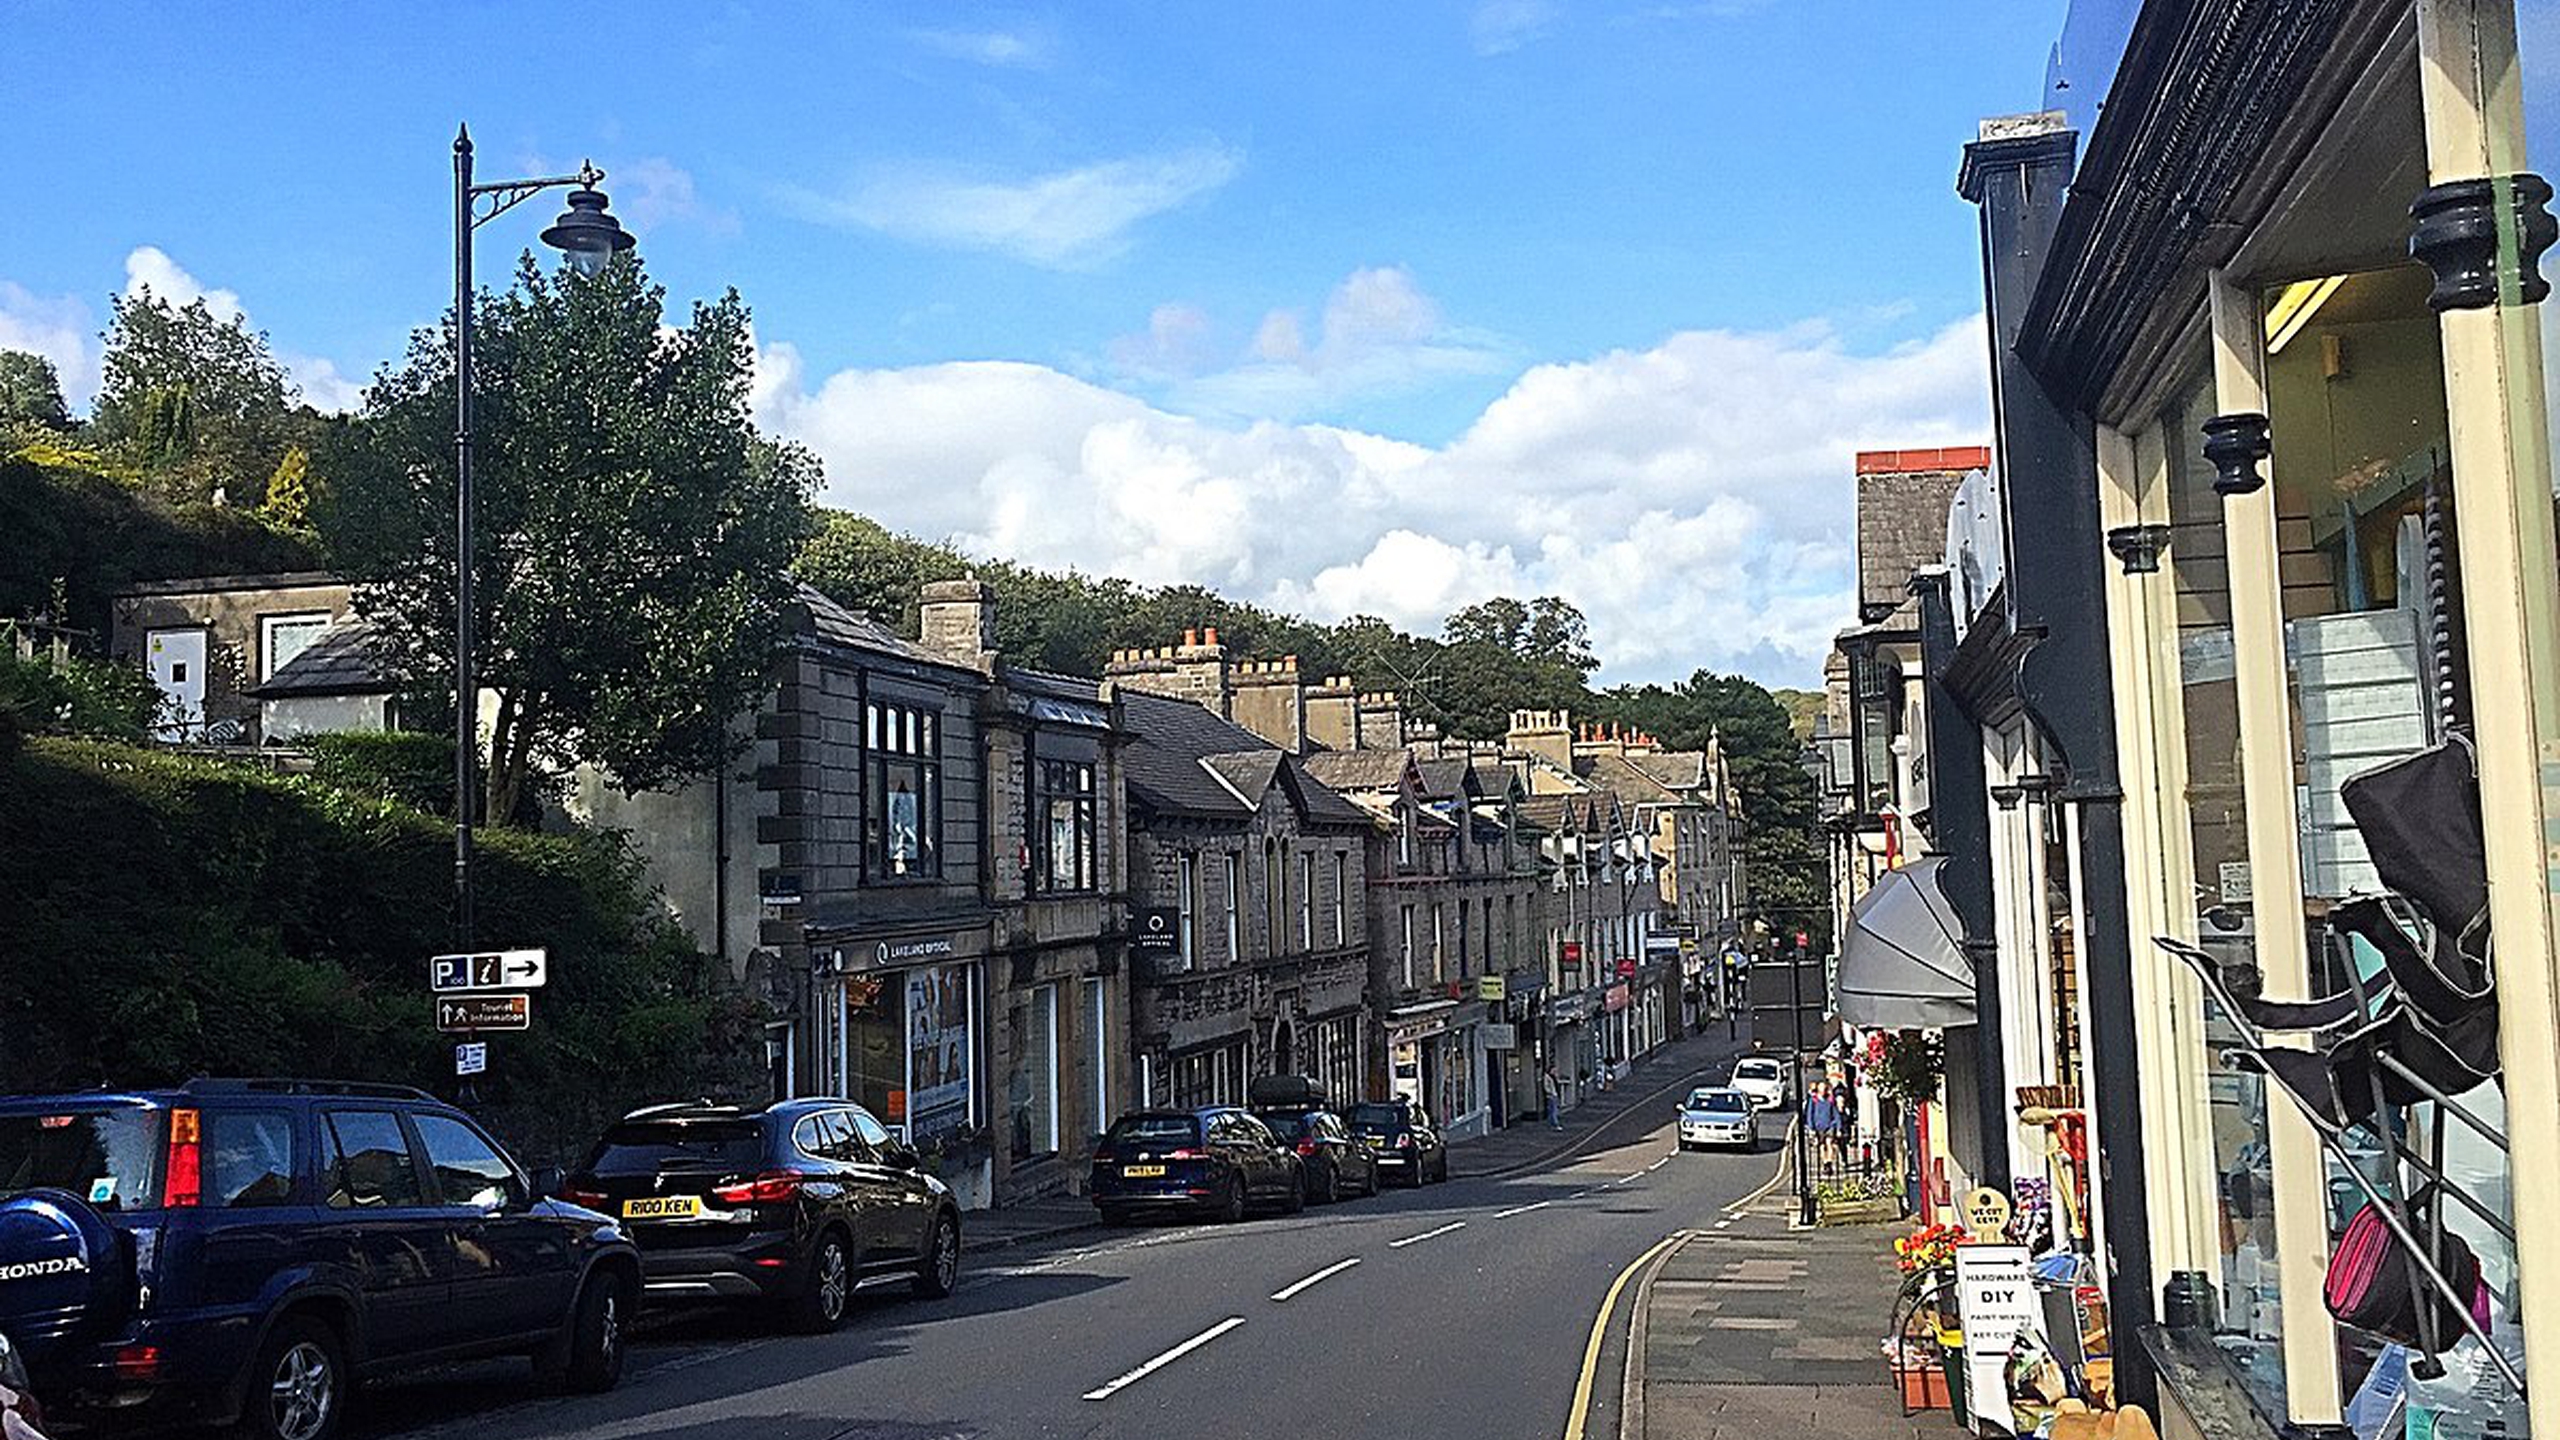 A photograph of Main Street, Grange Over Sands, taken from the top of the street on a bright sunny day, showing expensive cars and handsome old buildings.